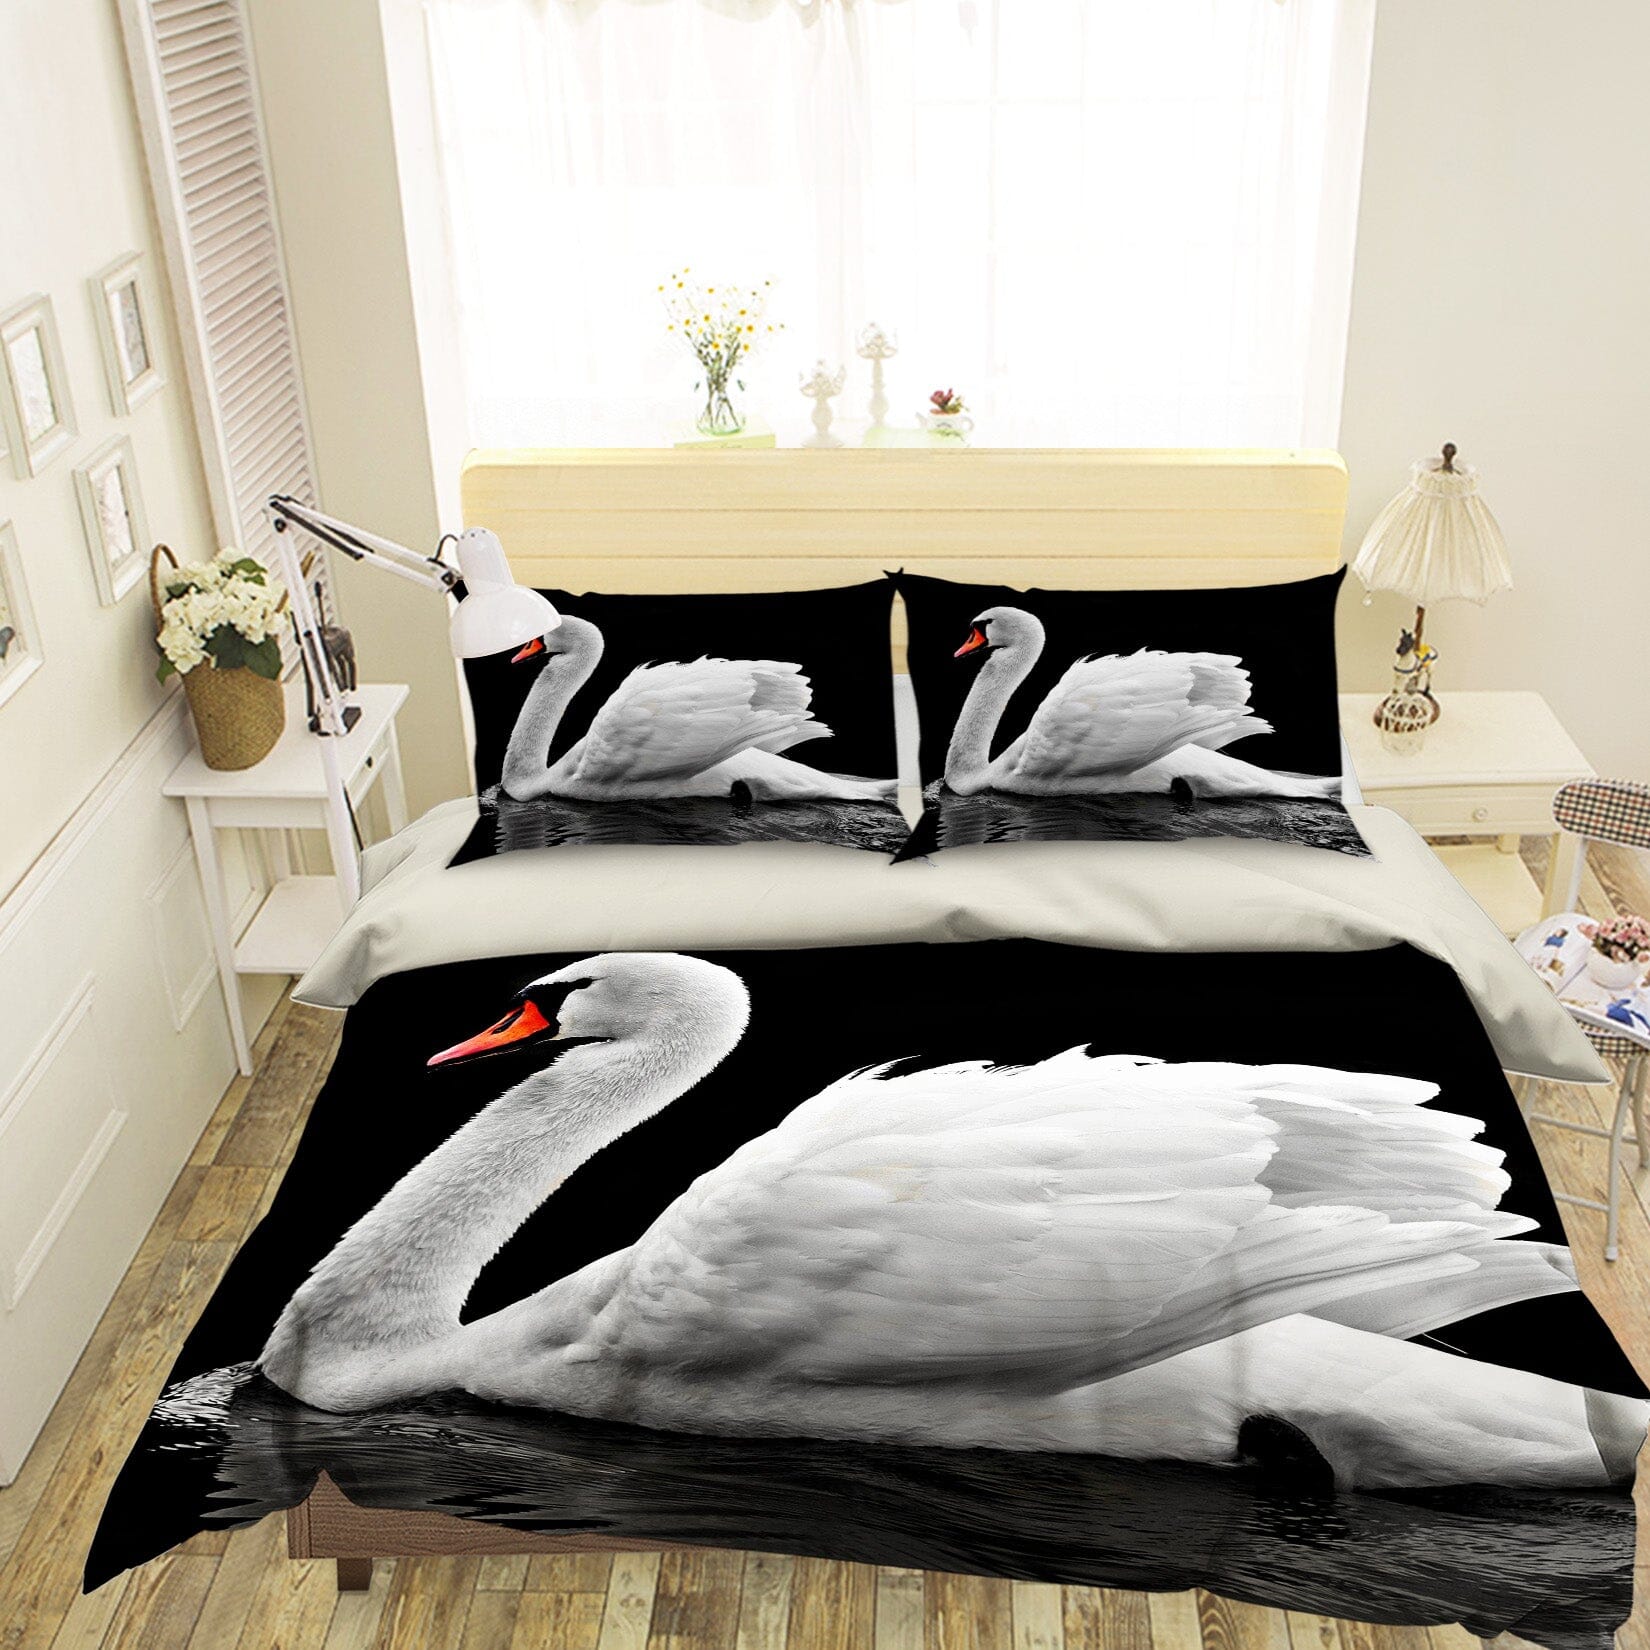 3D White Swan 1947 Bed Pillowcases Quilt Quiet Covers AJ Creativity Home 